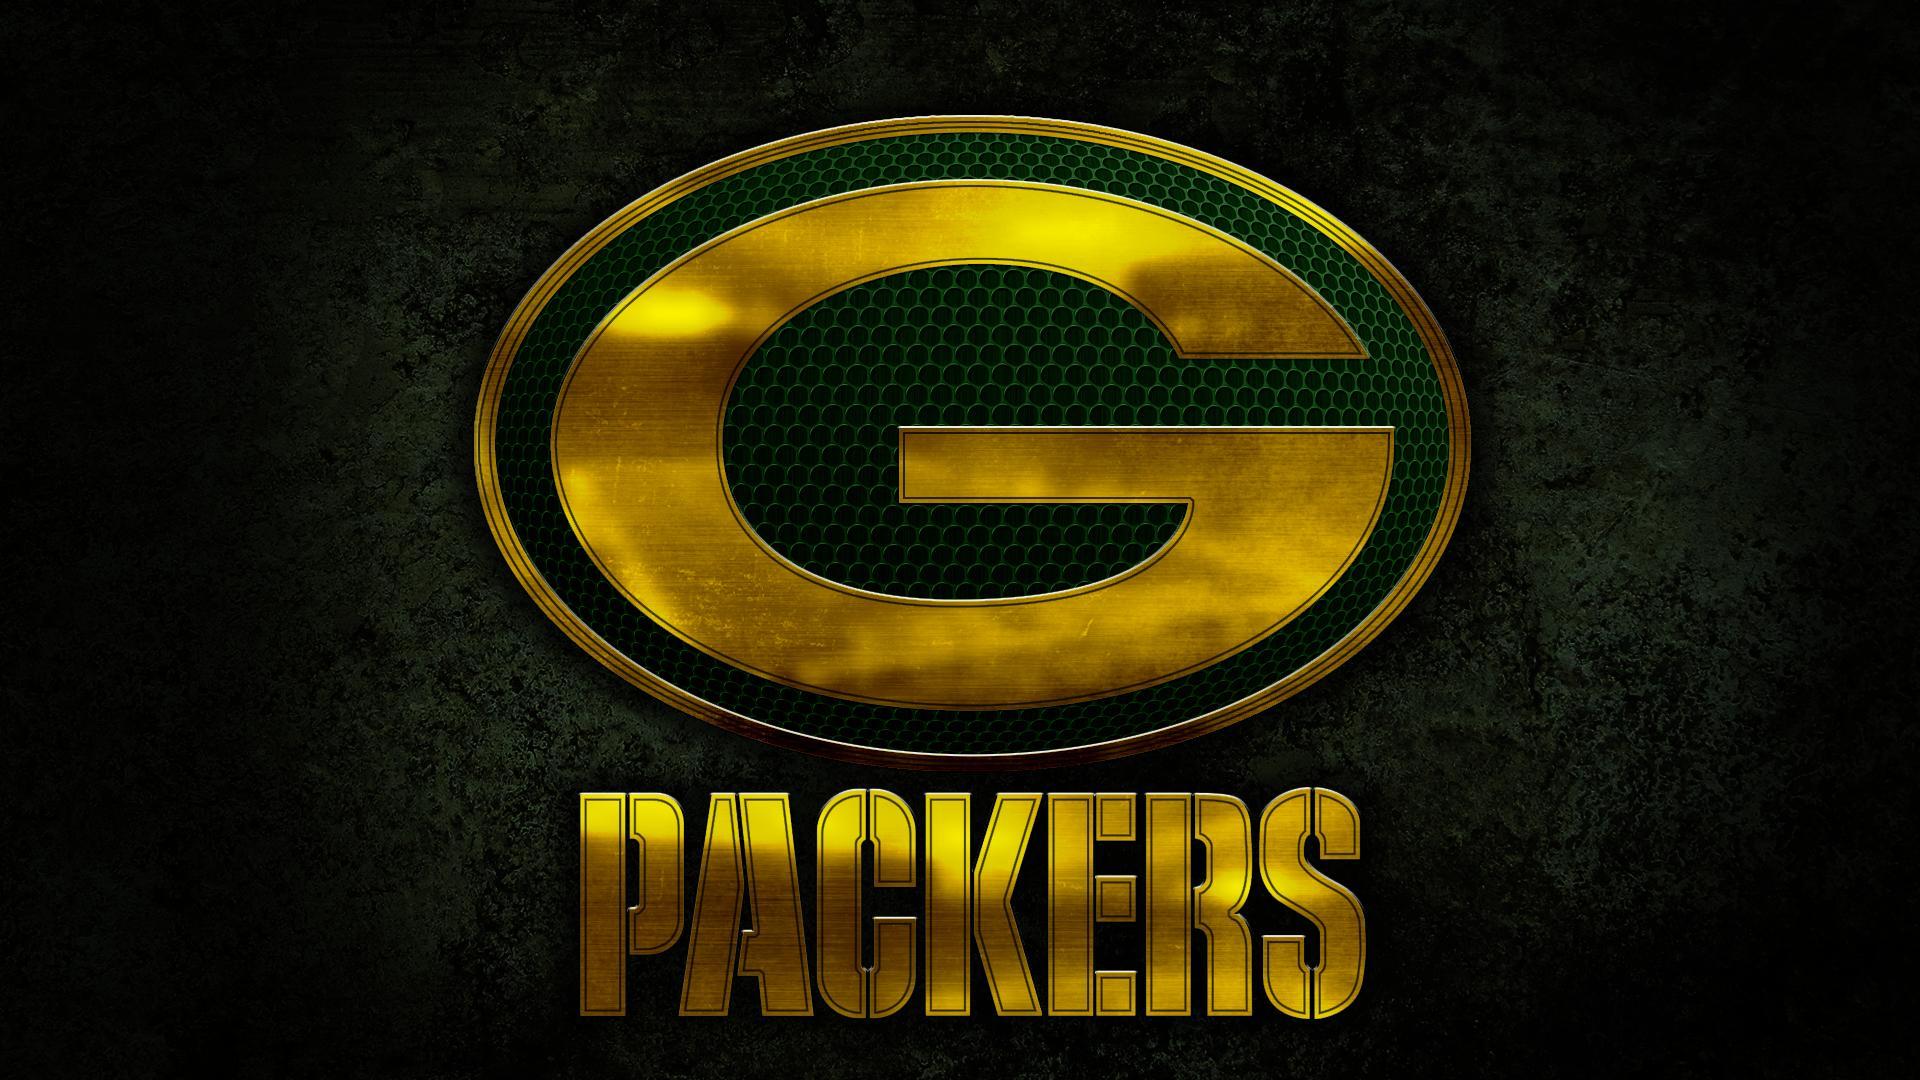 Cool Gold Logo - Green bay packers logo NFL Cool Wallpapers HD 1920x1080